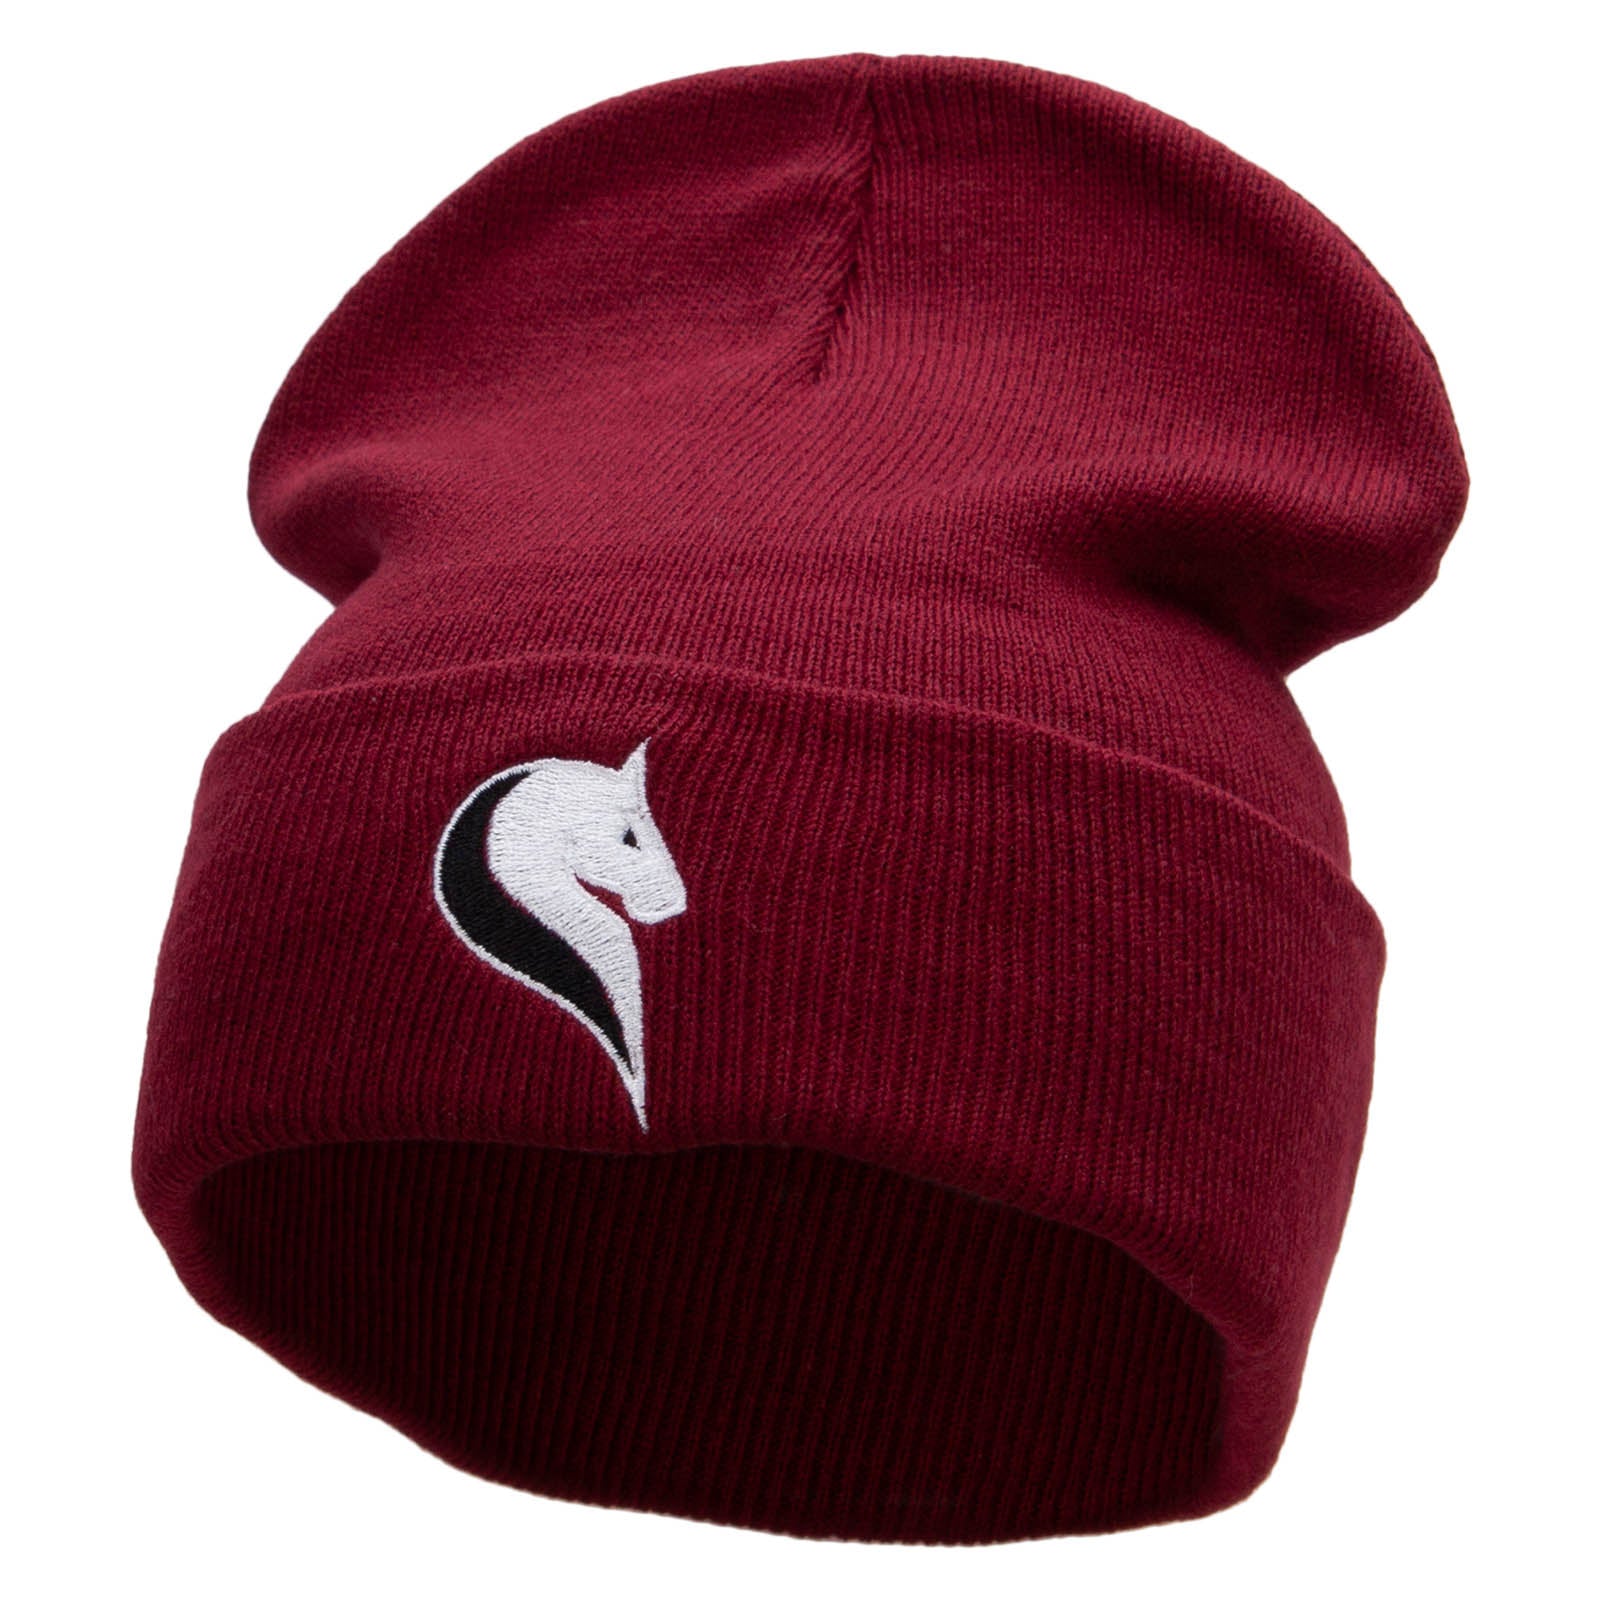 Horse Symbol Embroidered 12 Inch Long Knitted Beanie - Maroon OSFM